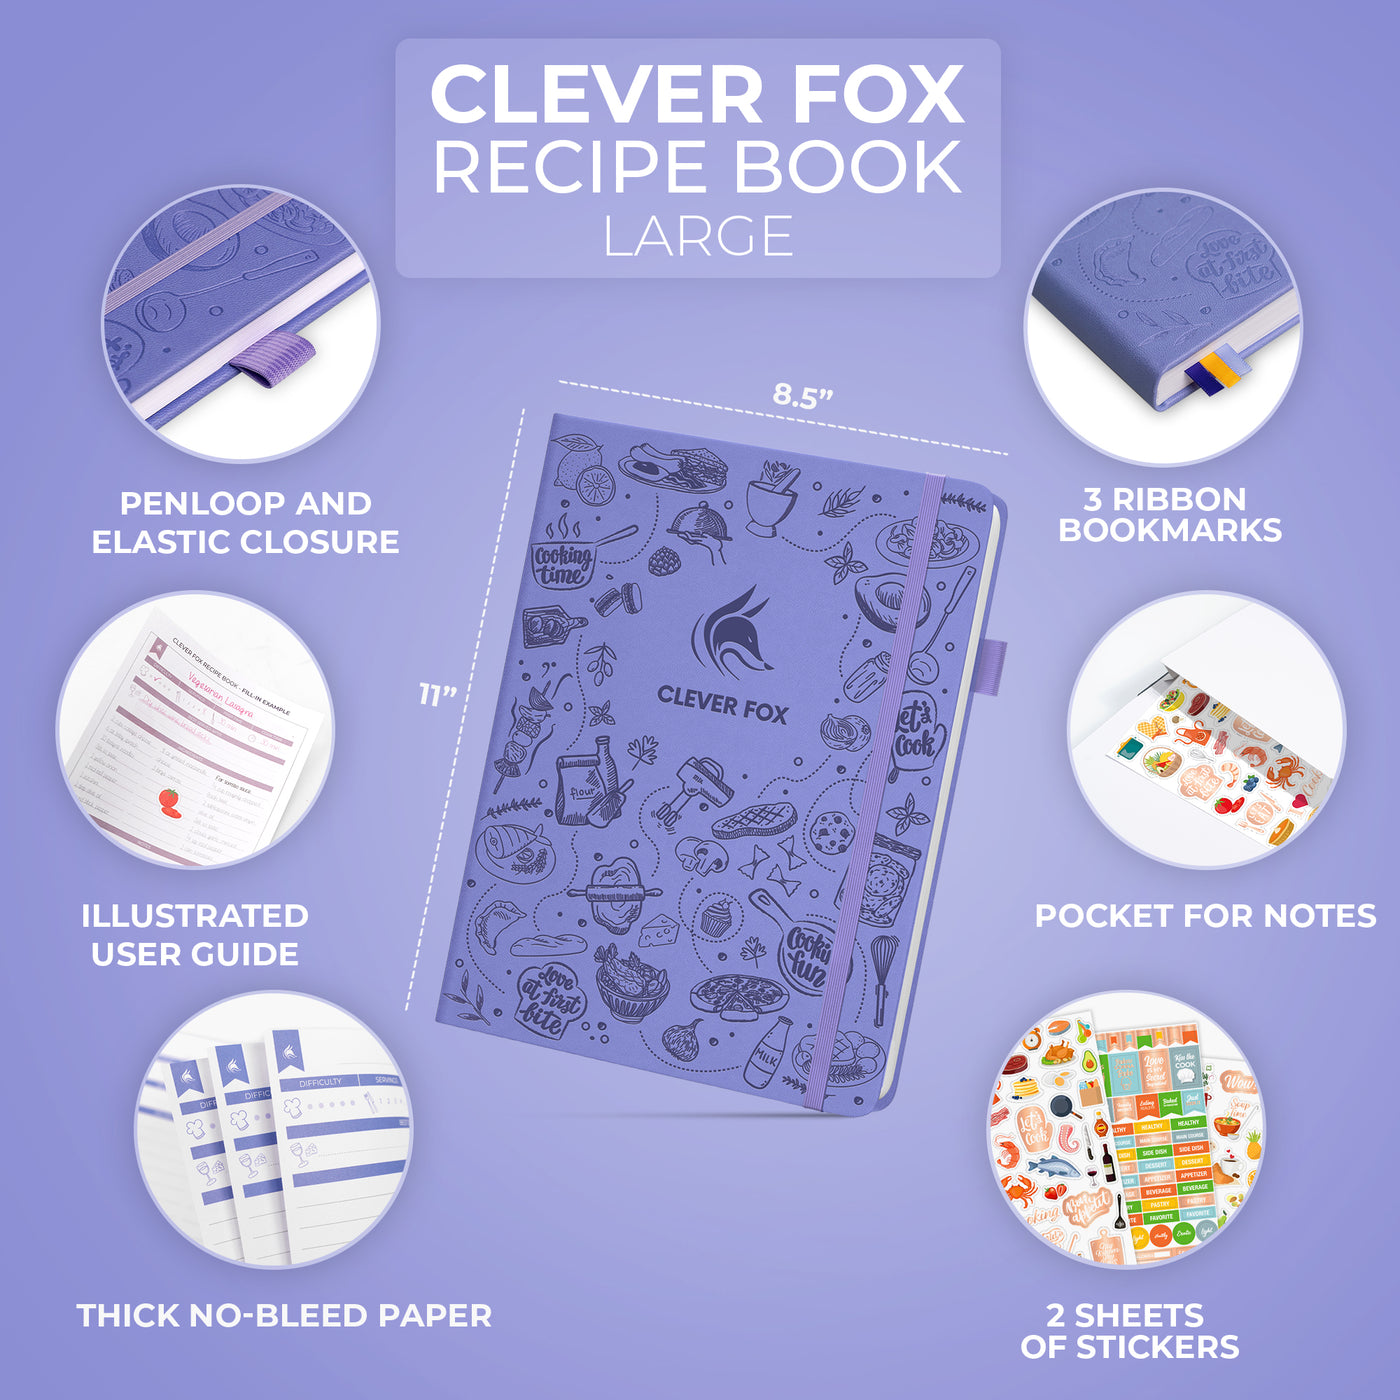 Clever Fox Recipe Book now comes in a large and spiral-bound